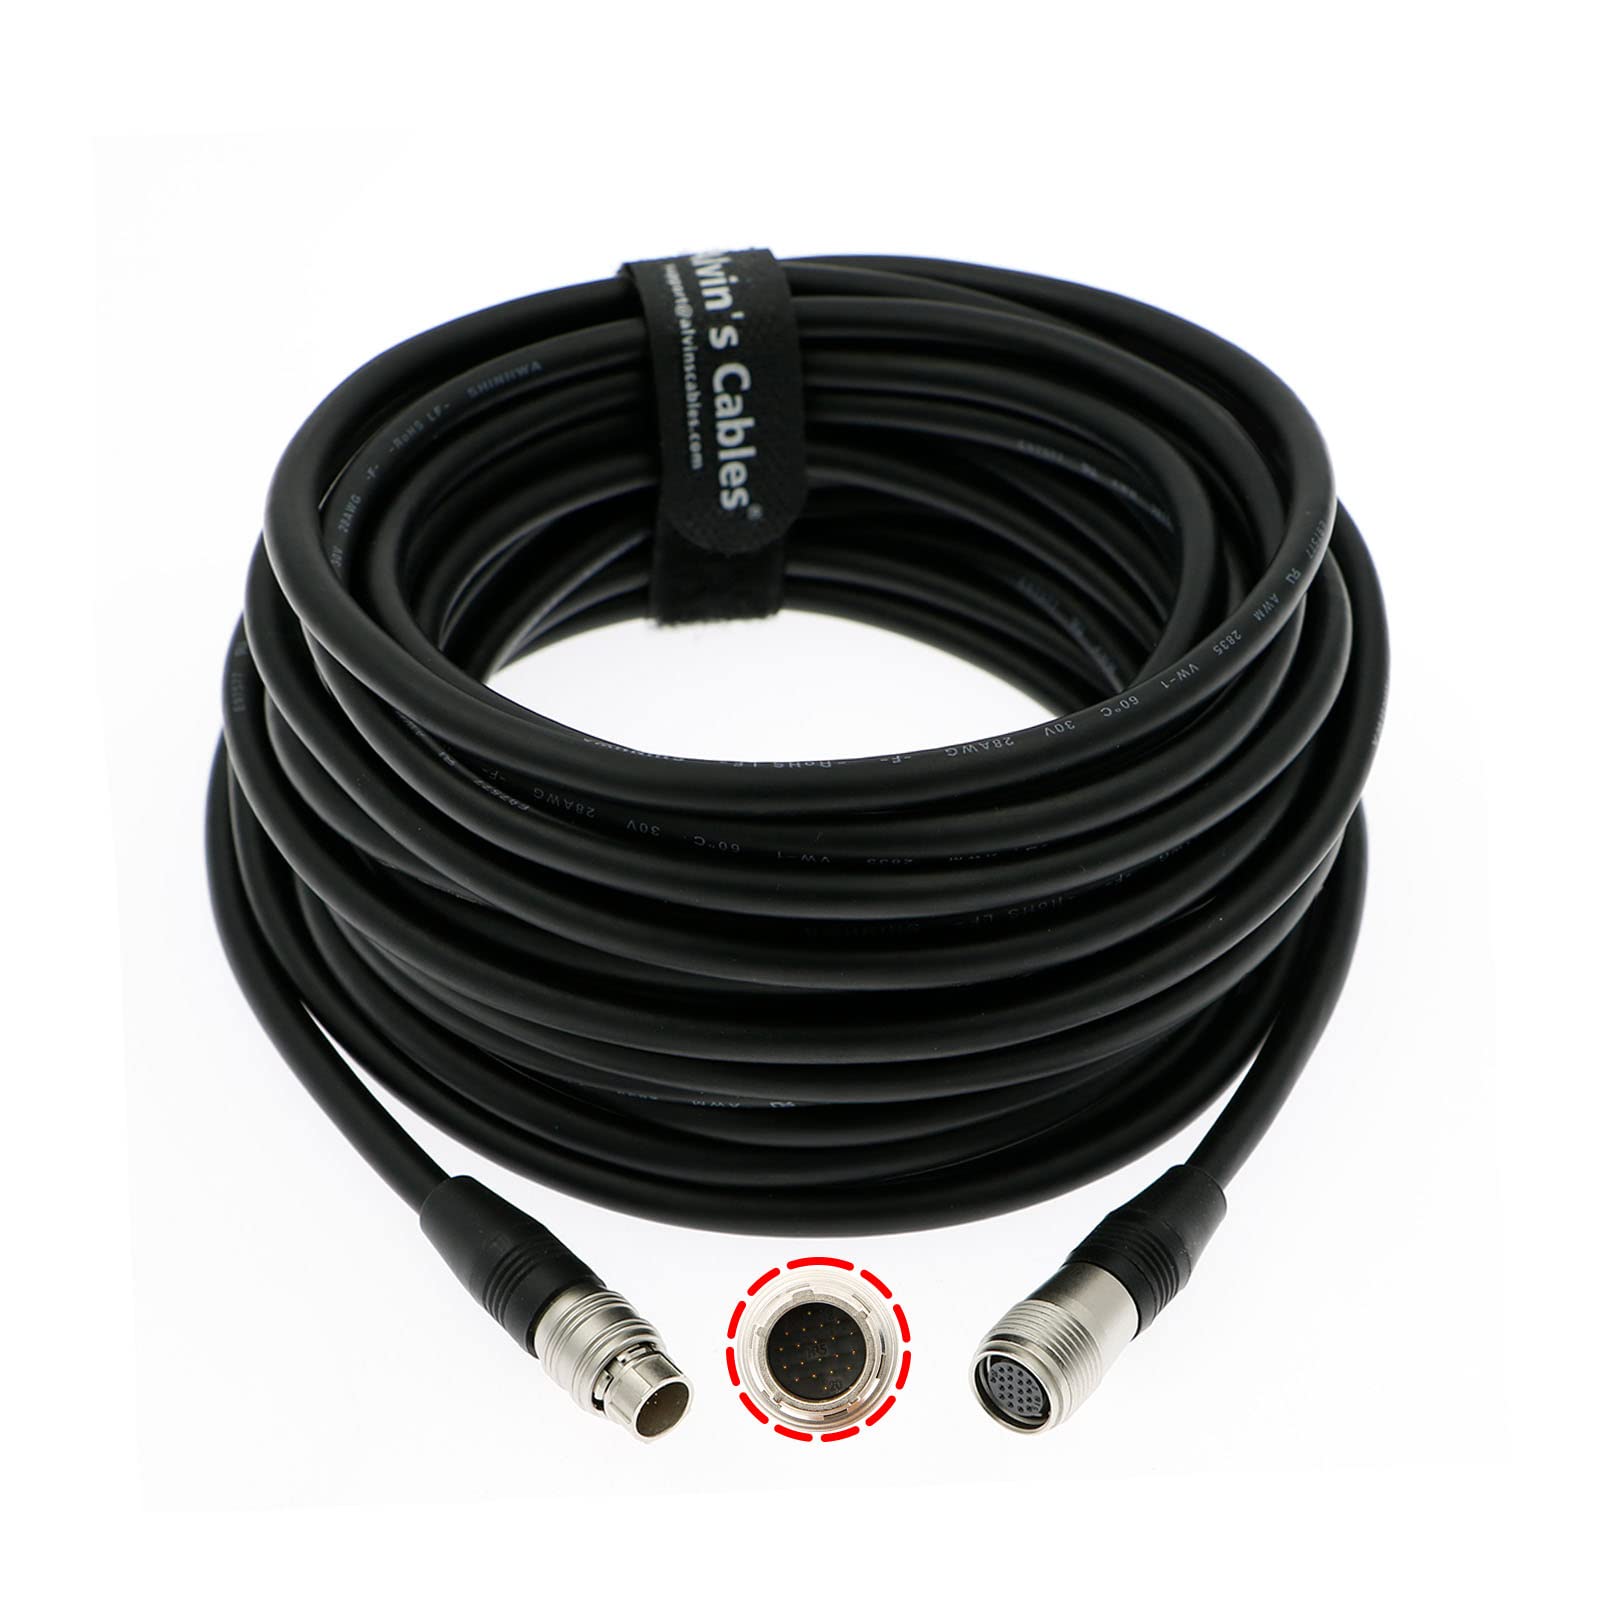 Alvin’s Cables Hirose 20 Pin Male to Female Extension Cable for Canon CN-E18-80mm Lens to FPD-400D| ZSG-C10| ZSD-300D Controller 10M/32.8ft